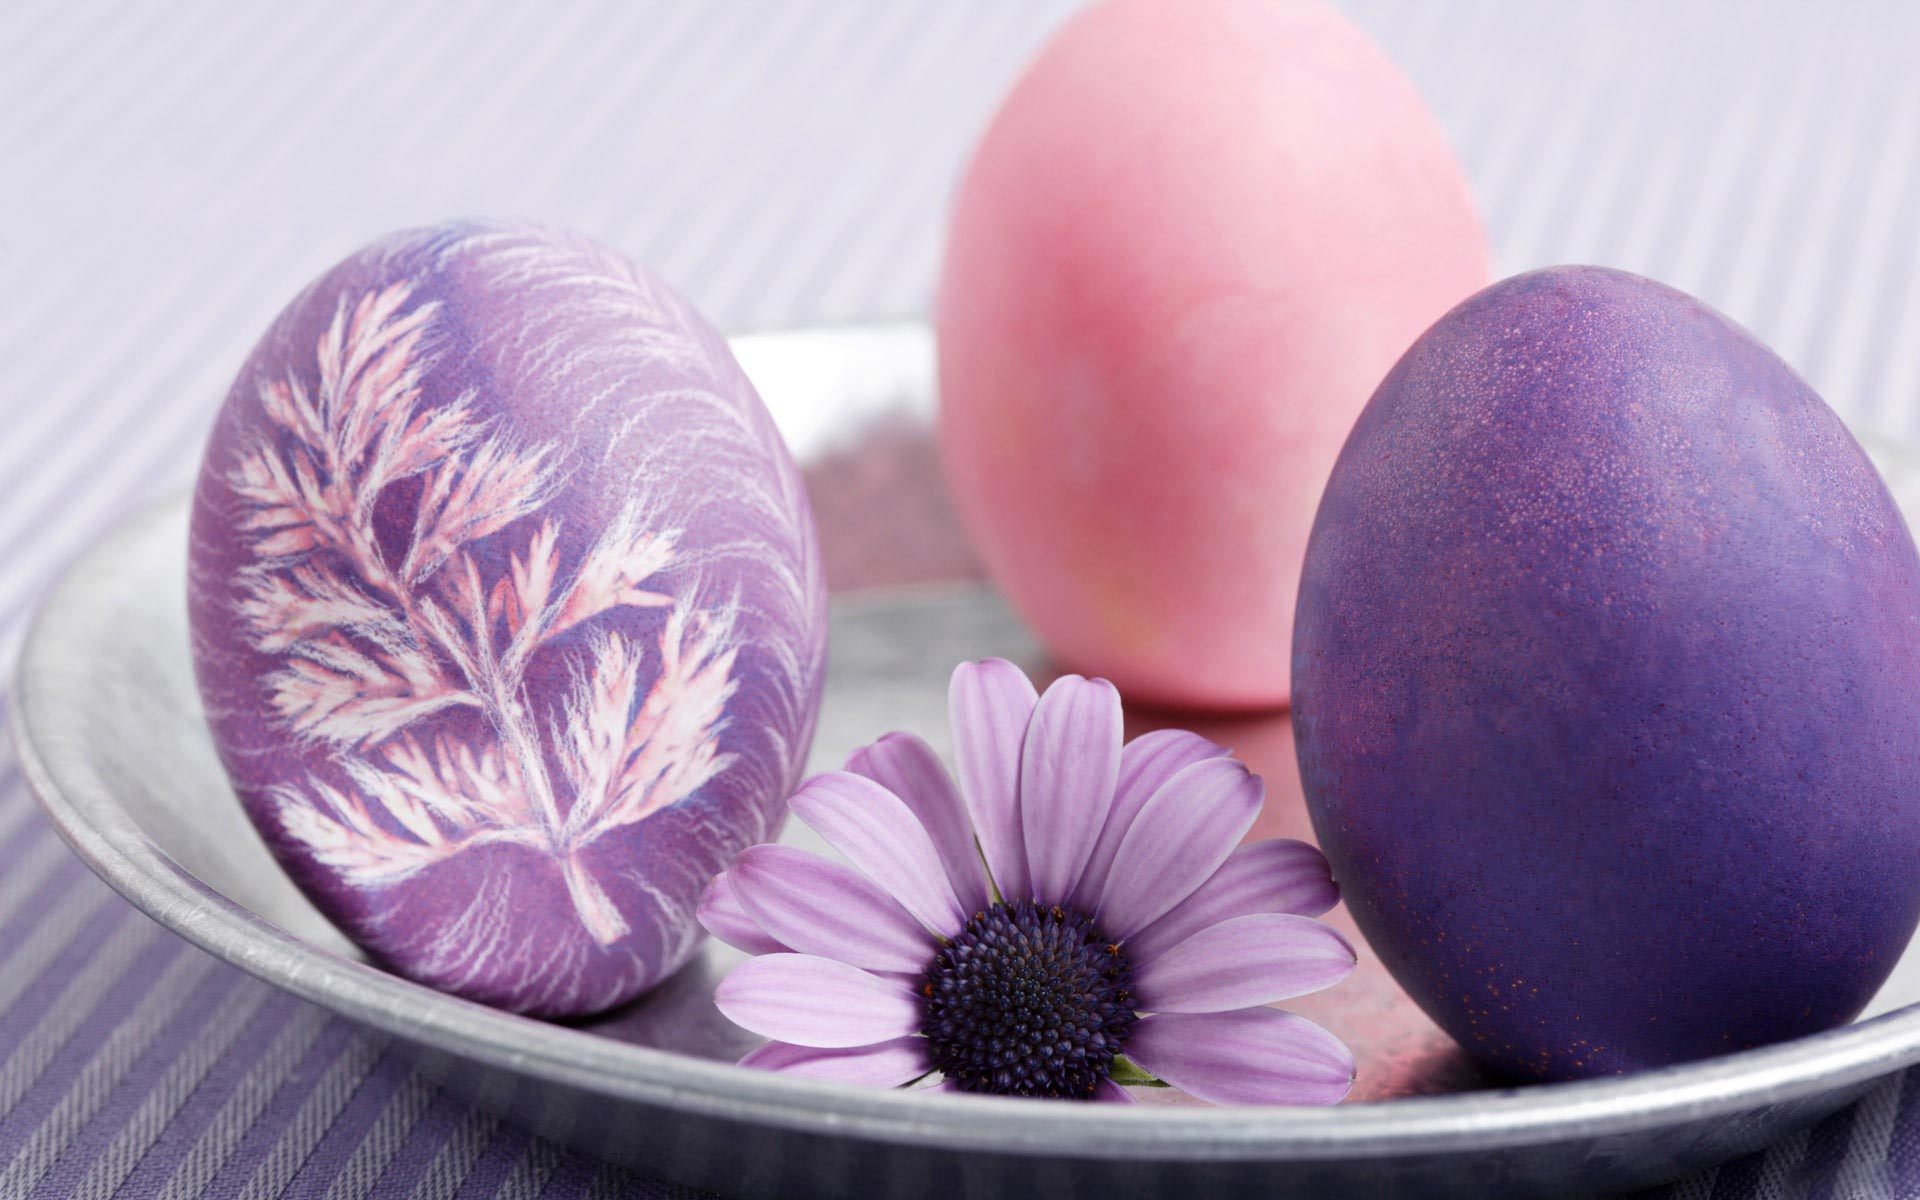 Tips to enjoy weight loss this Easter